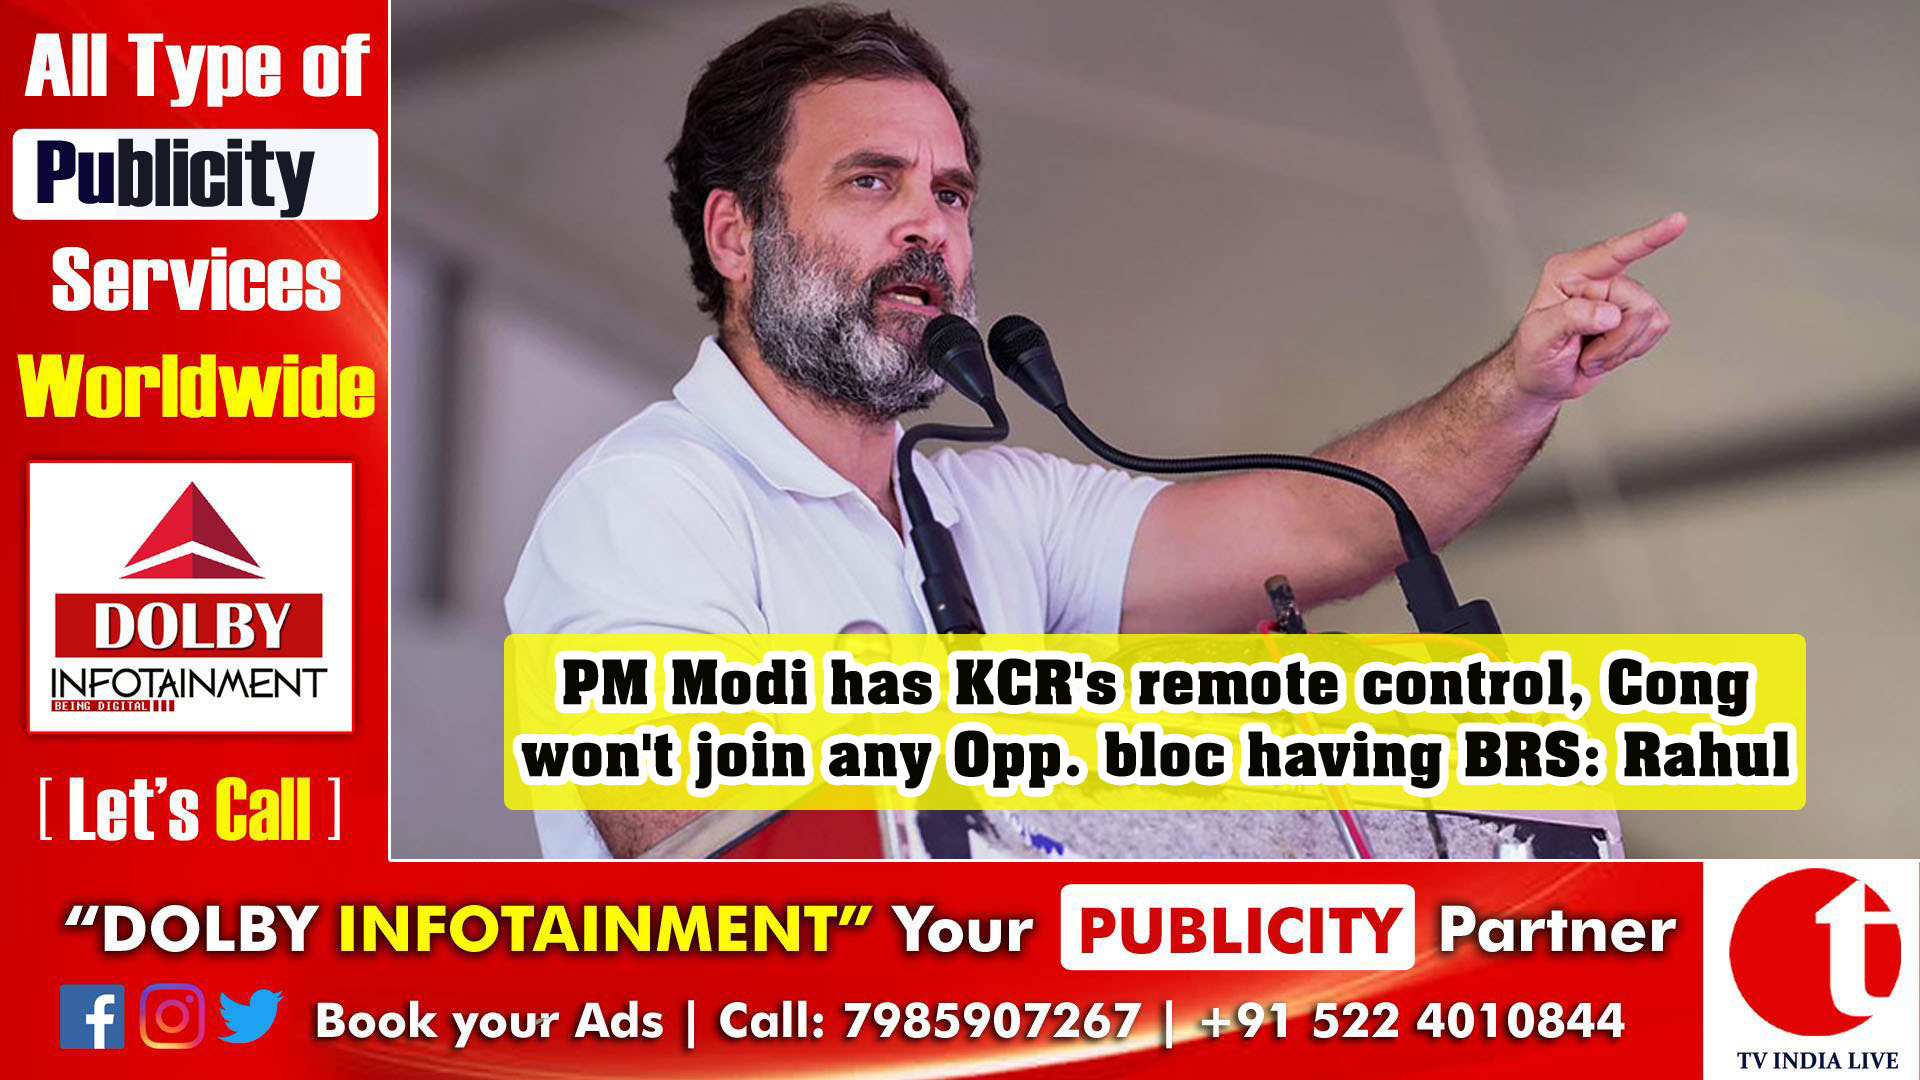 PM Modi has KCR's remote control, Cong won't join any Opp. bloc having BRS: Rahul